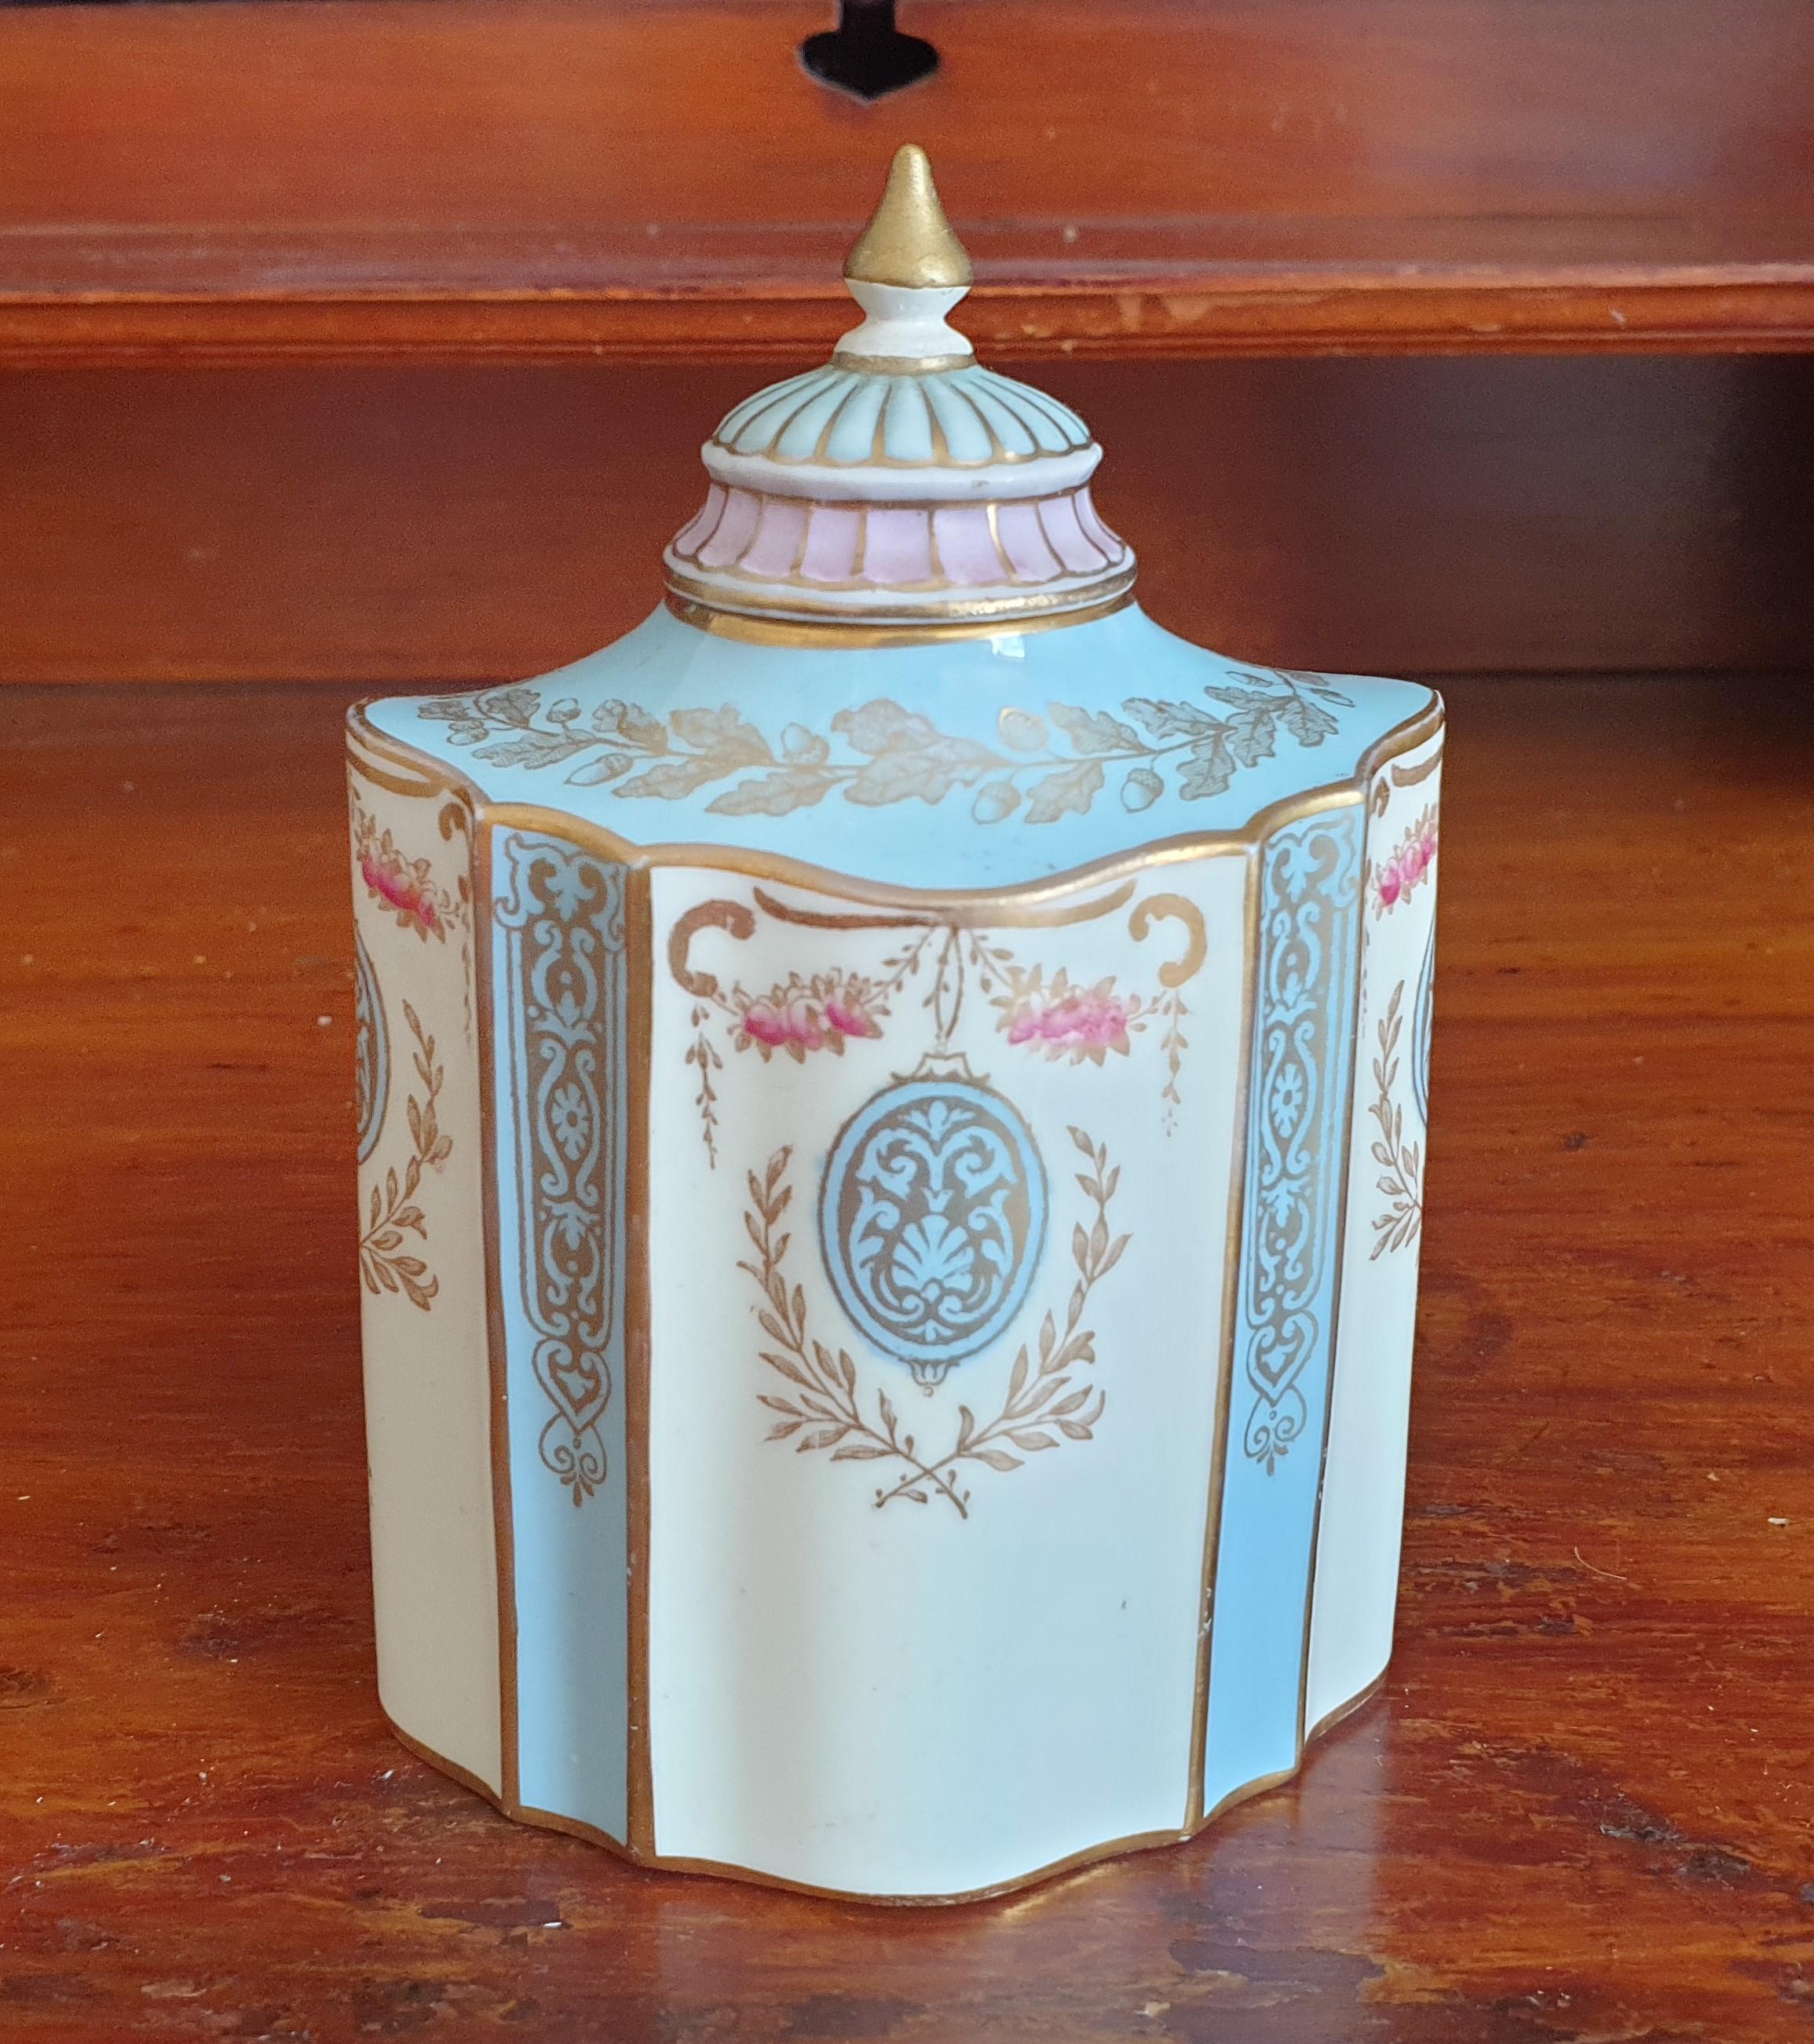 A 19th century Wedgewood tea caddy handpainted with little pink roses, with gilt leaves and gilt dercoration.